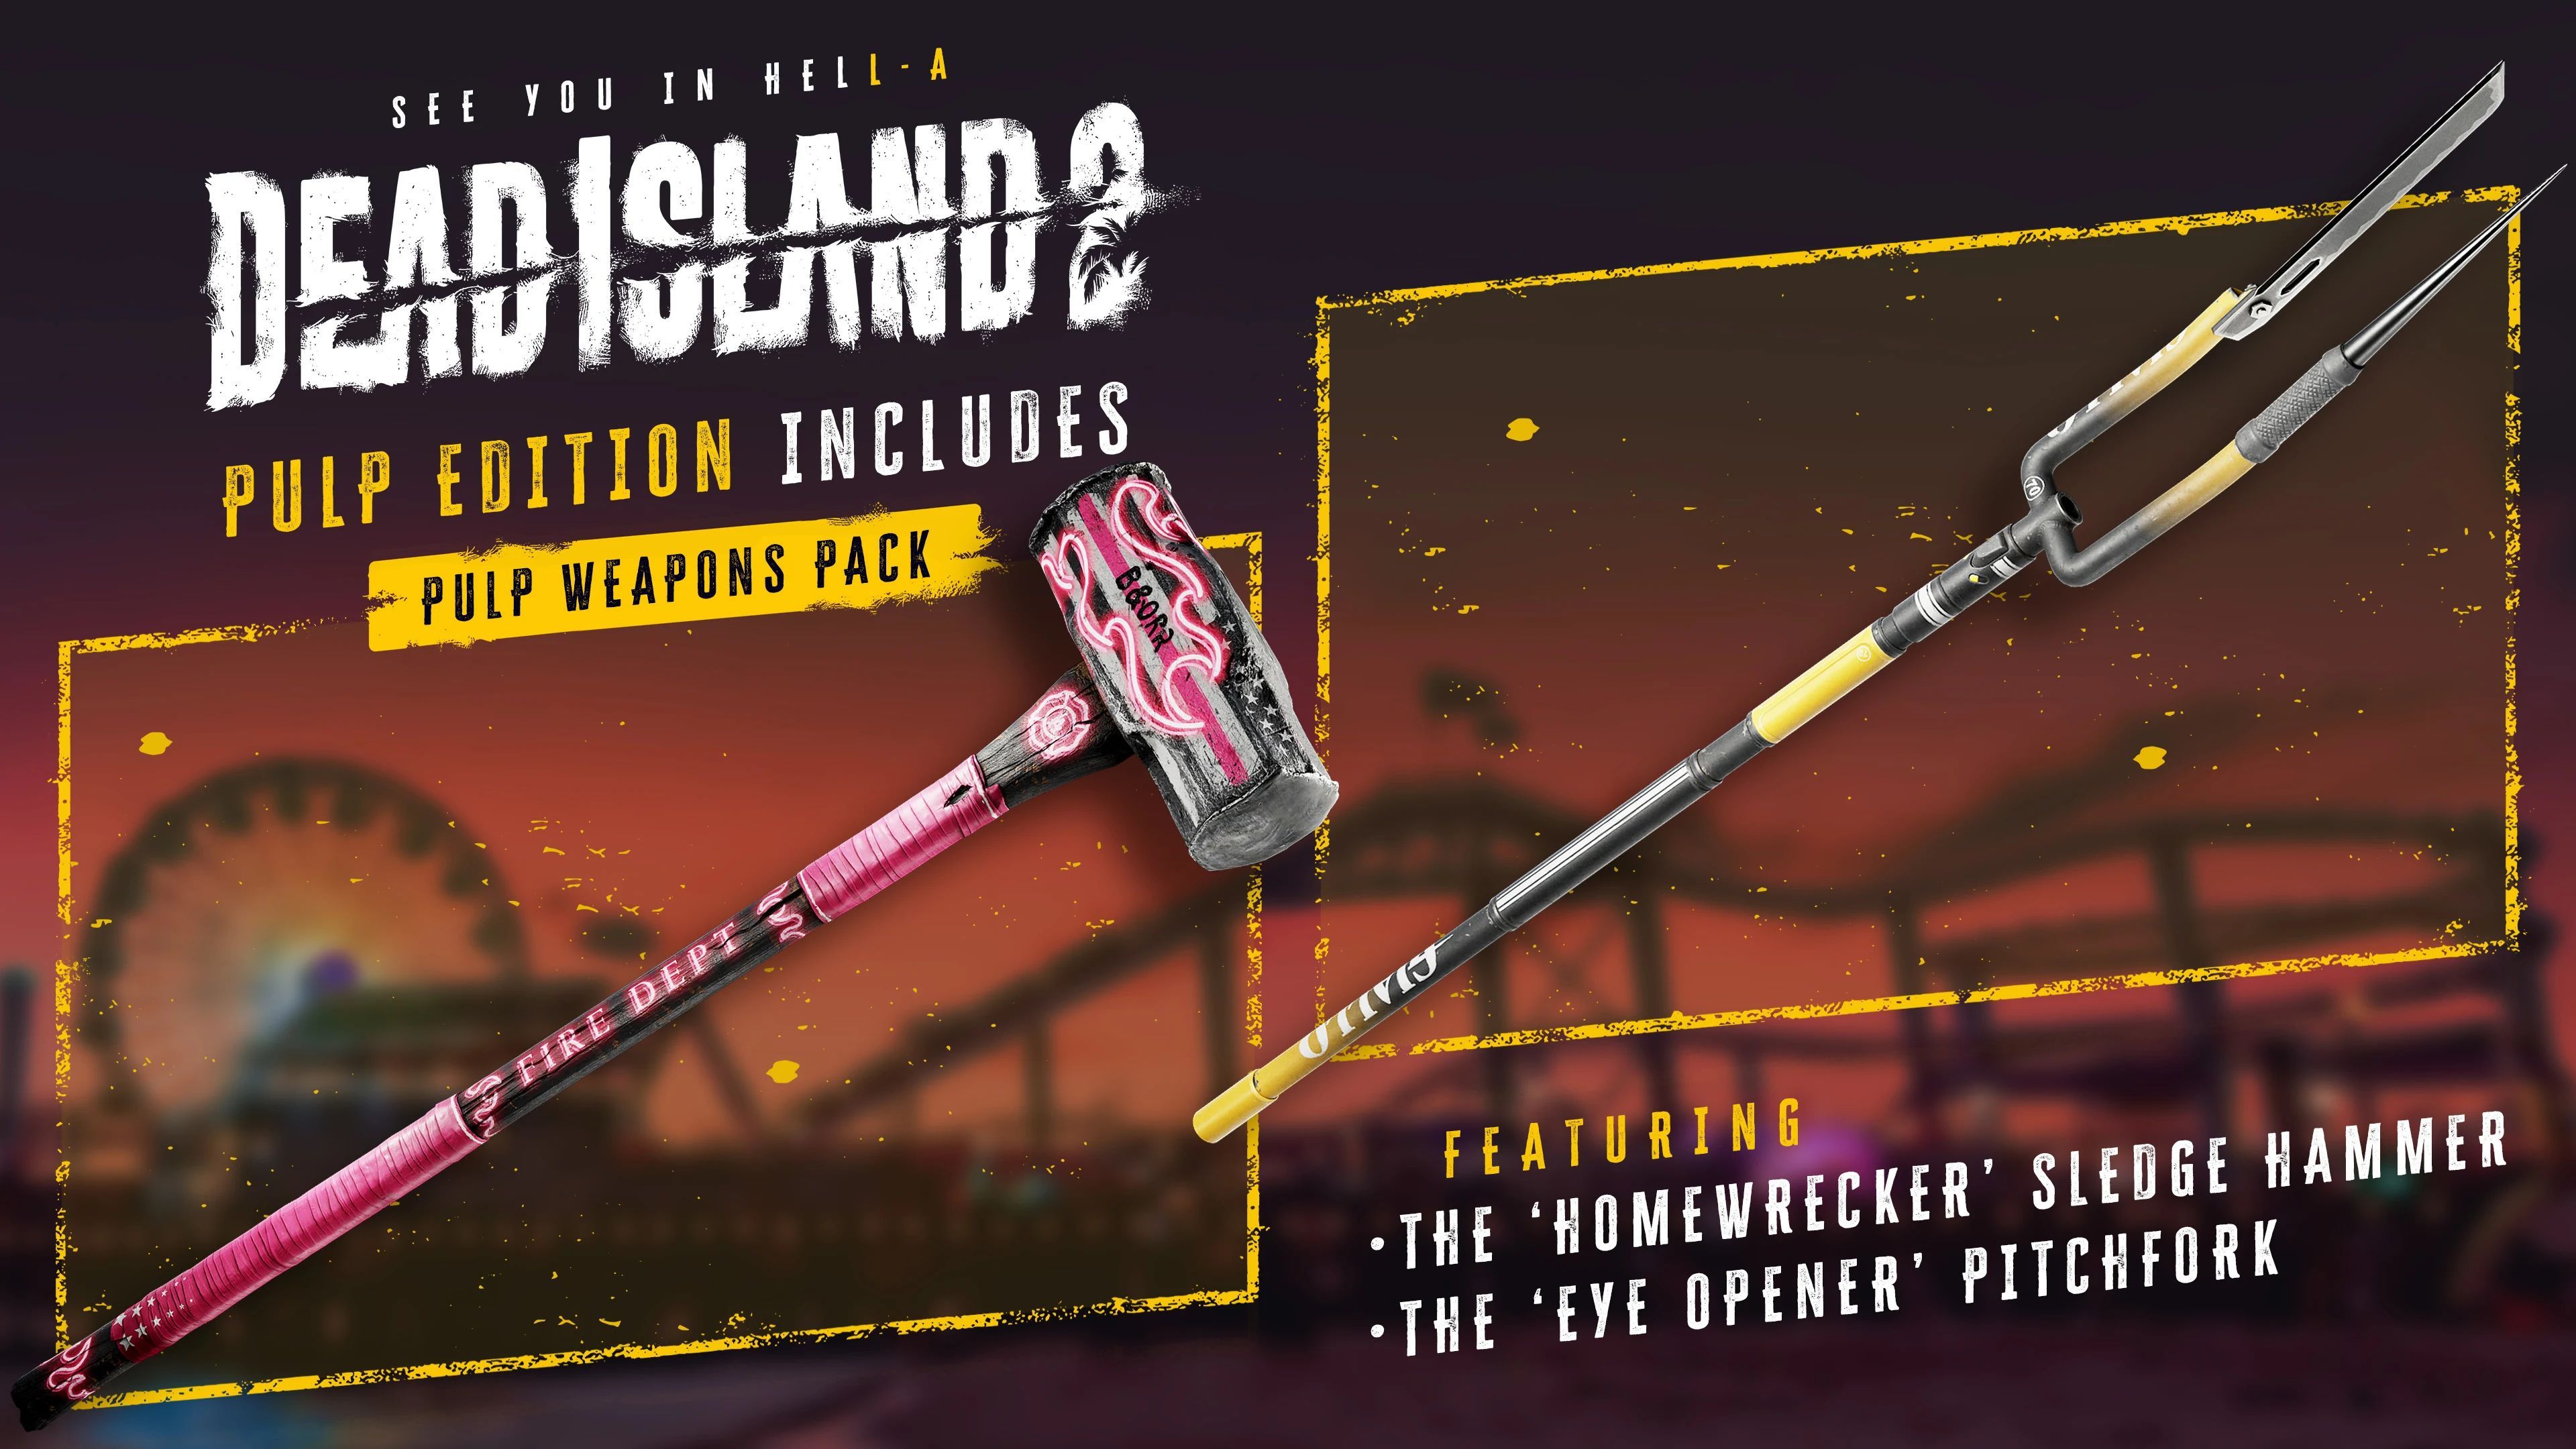 Pulp edition dead island. Dead Island 2 Pulp Edition Pack. Pulp Weapons Pack.